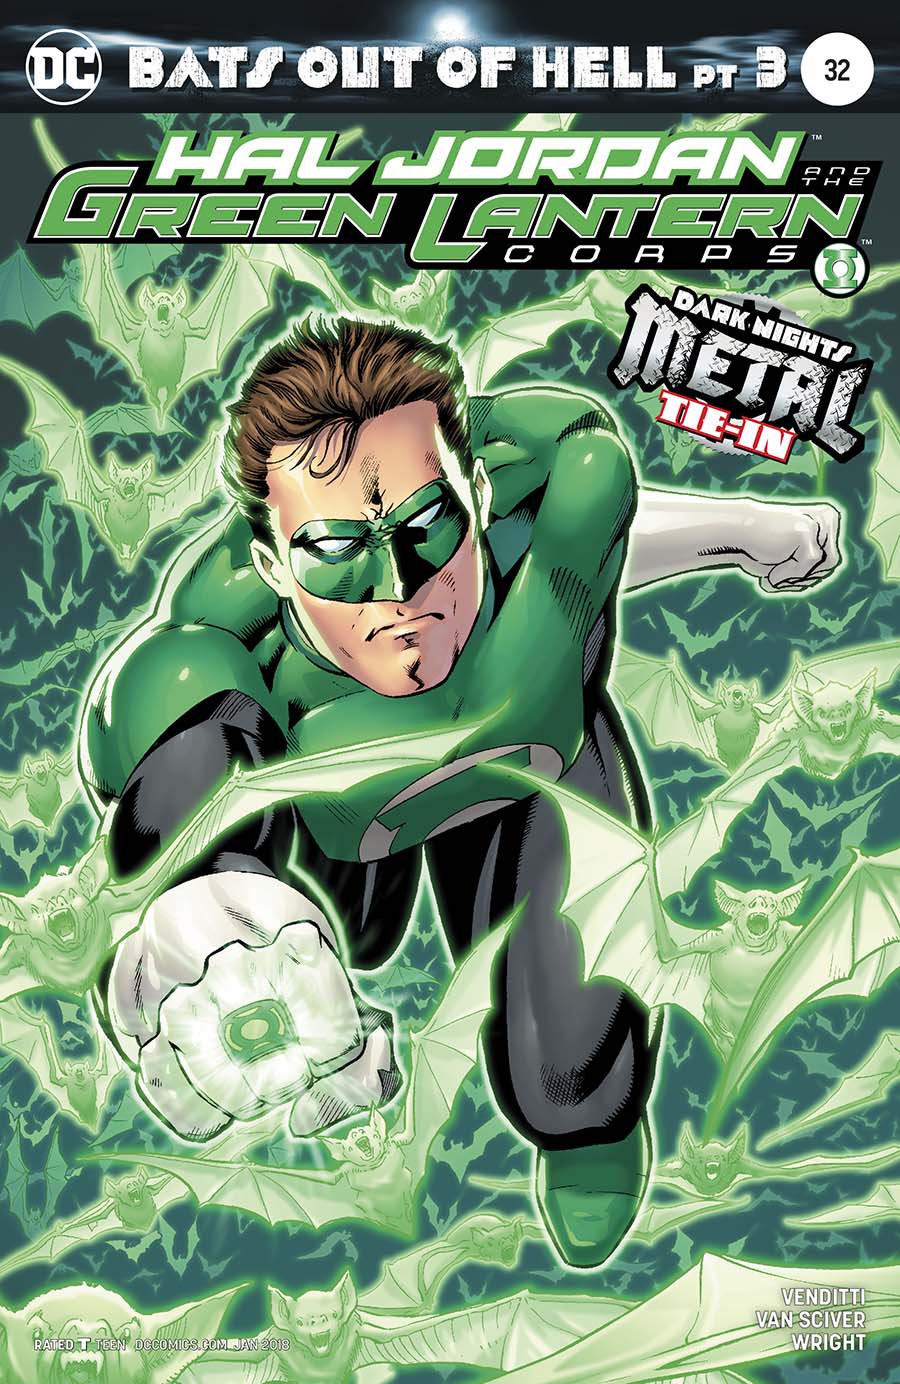 Hal Jordan And The Green Lantern Corps #32 Cover B Variant Barry Kitson Cover (Bats Out Of Hell Part 3)(Dark Nights Metal Tie-In)